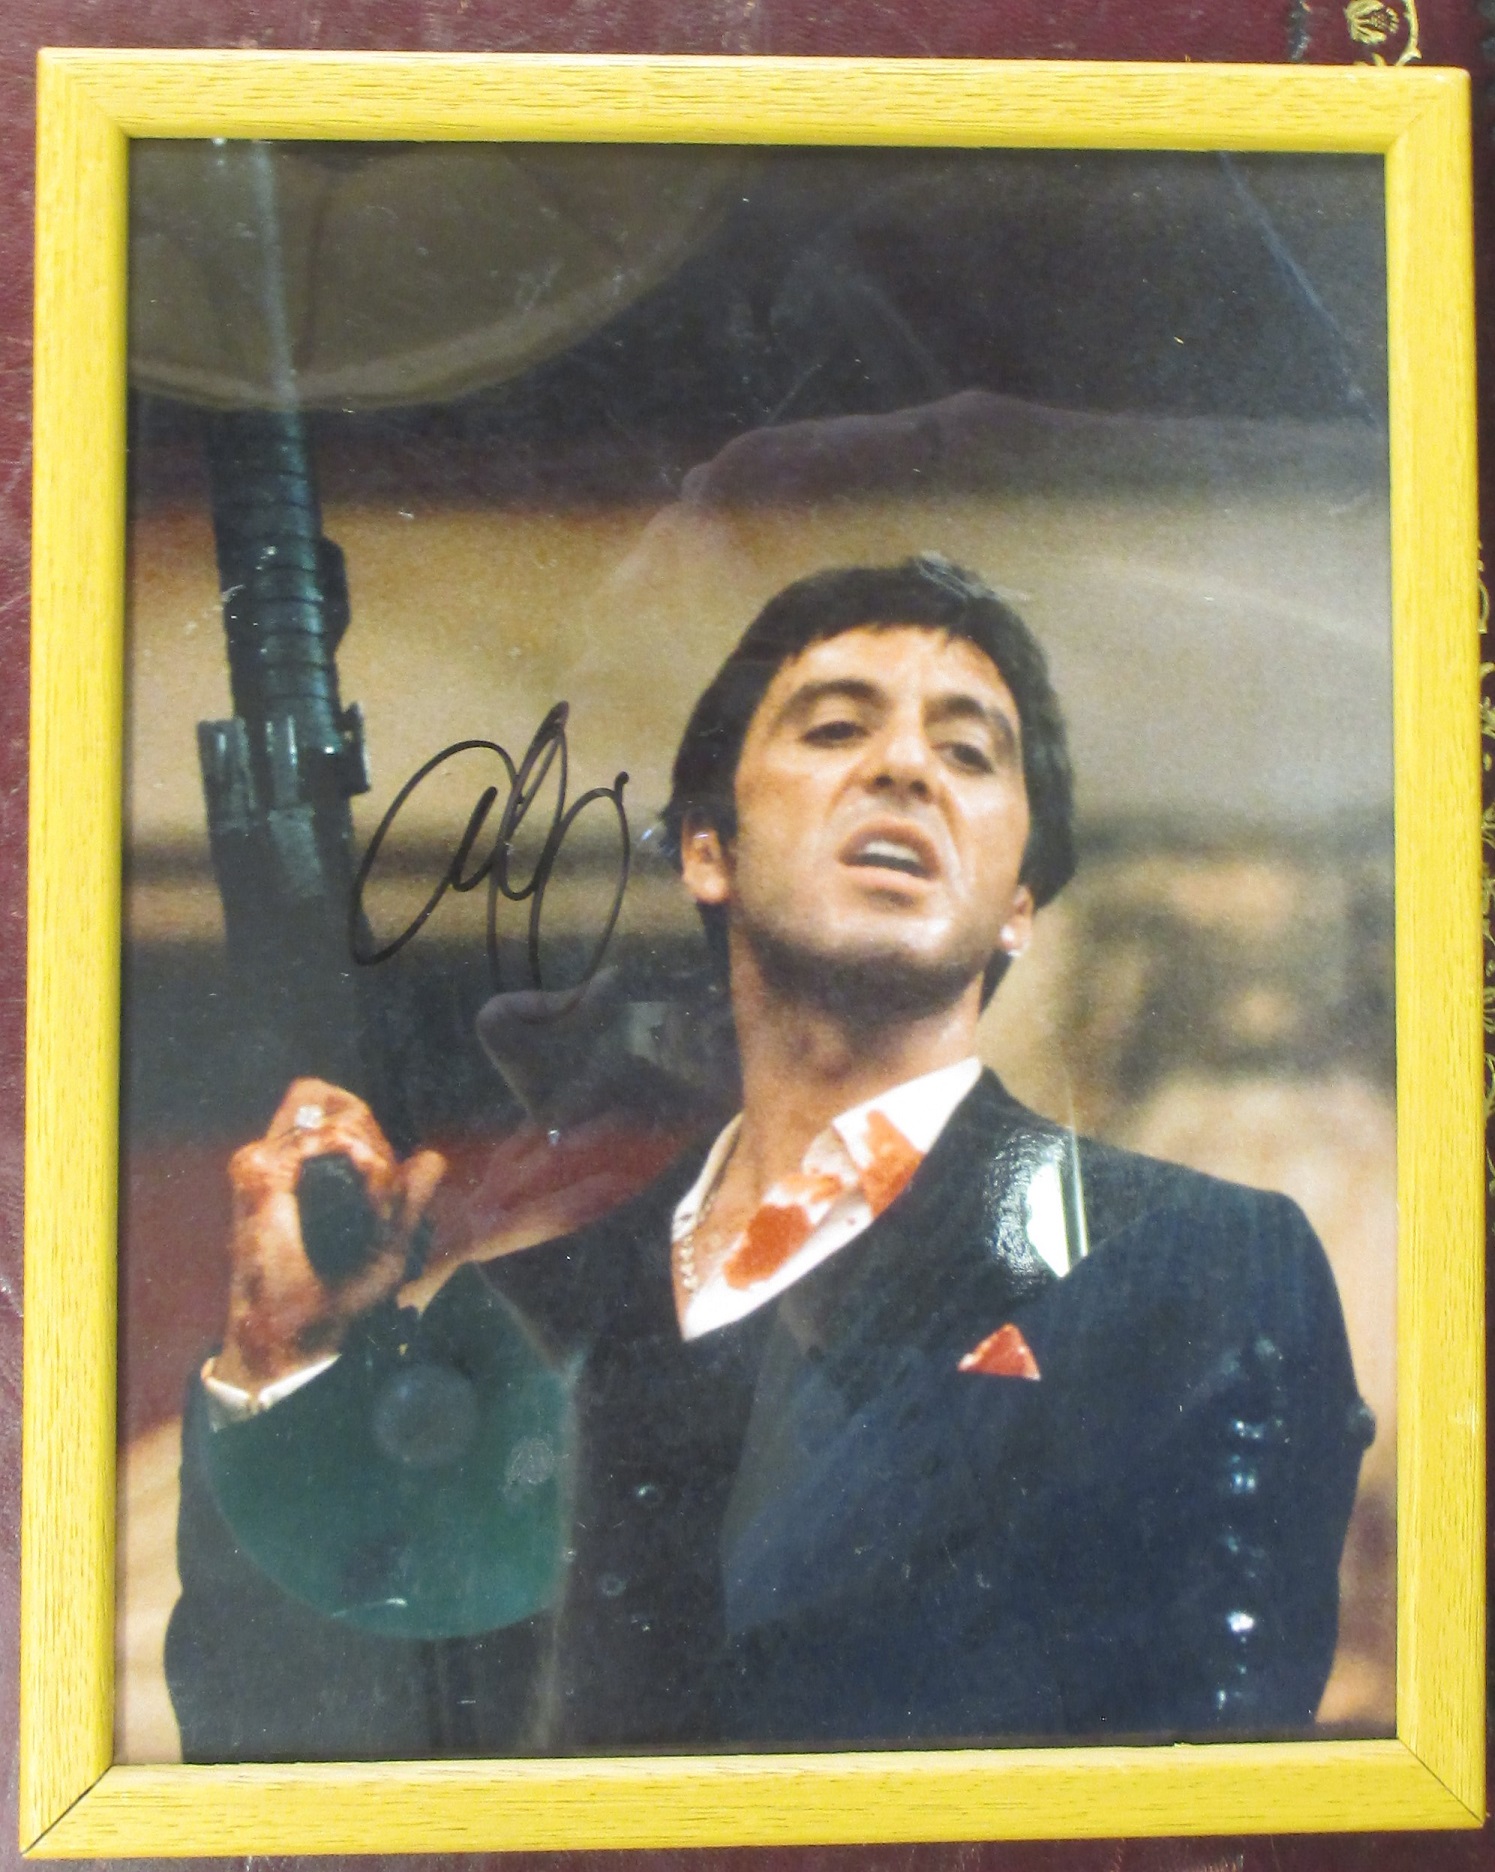 A genuine hand signed autographed picture of Al Pacino. Register and bid at http